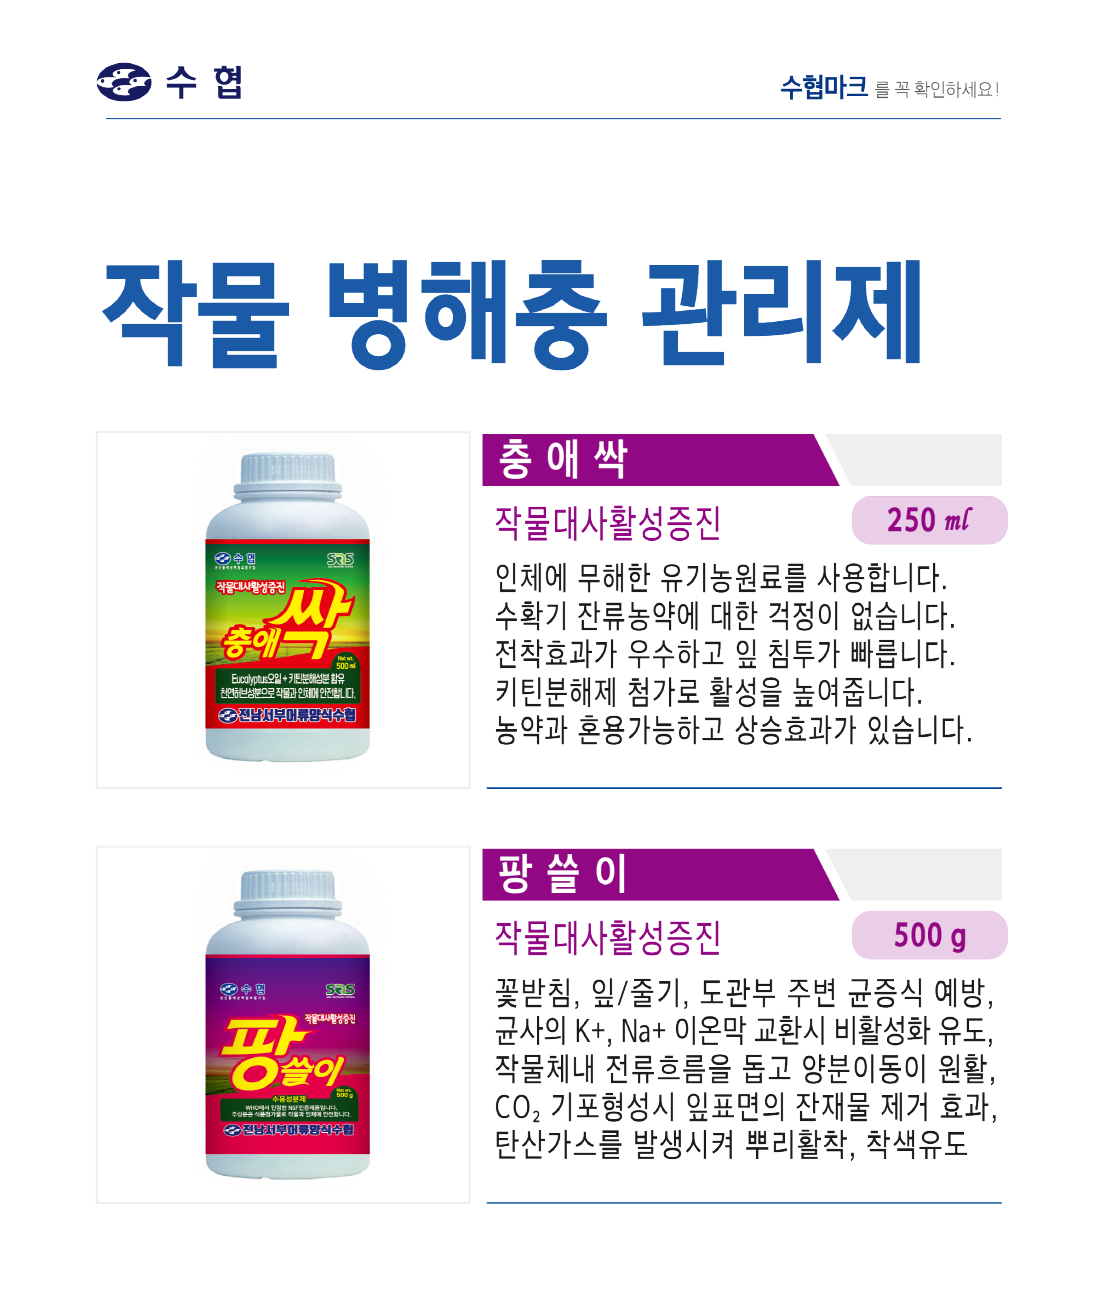 http://suhyup2019.handpr.kr/bs/se2/imgup/1589964416det2_s.png